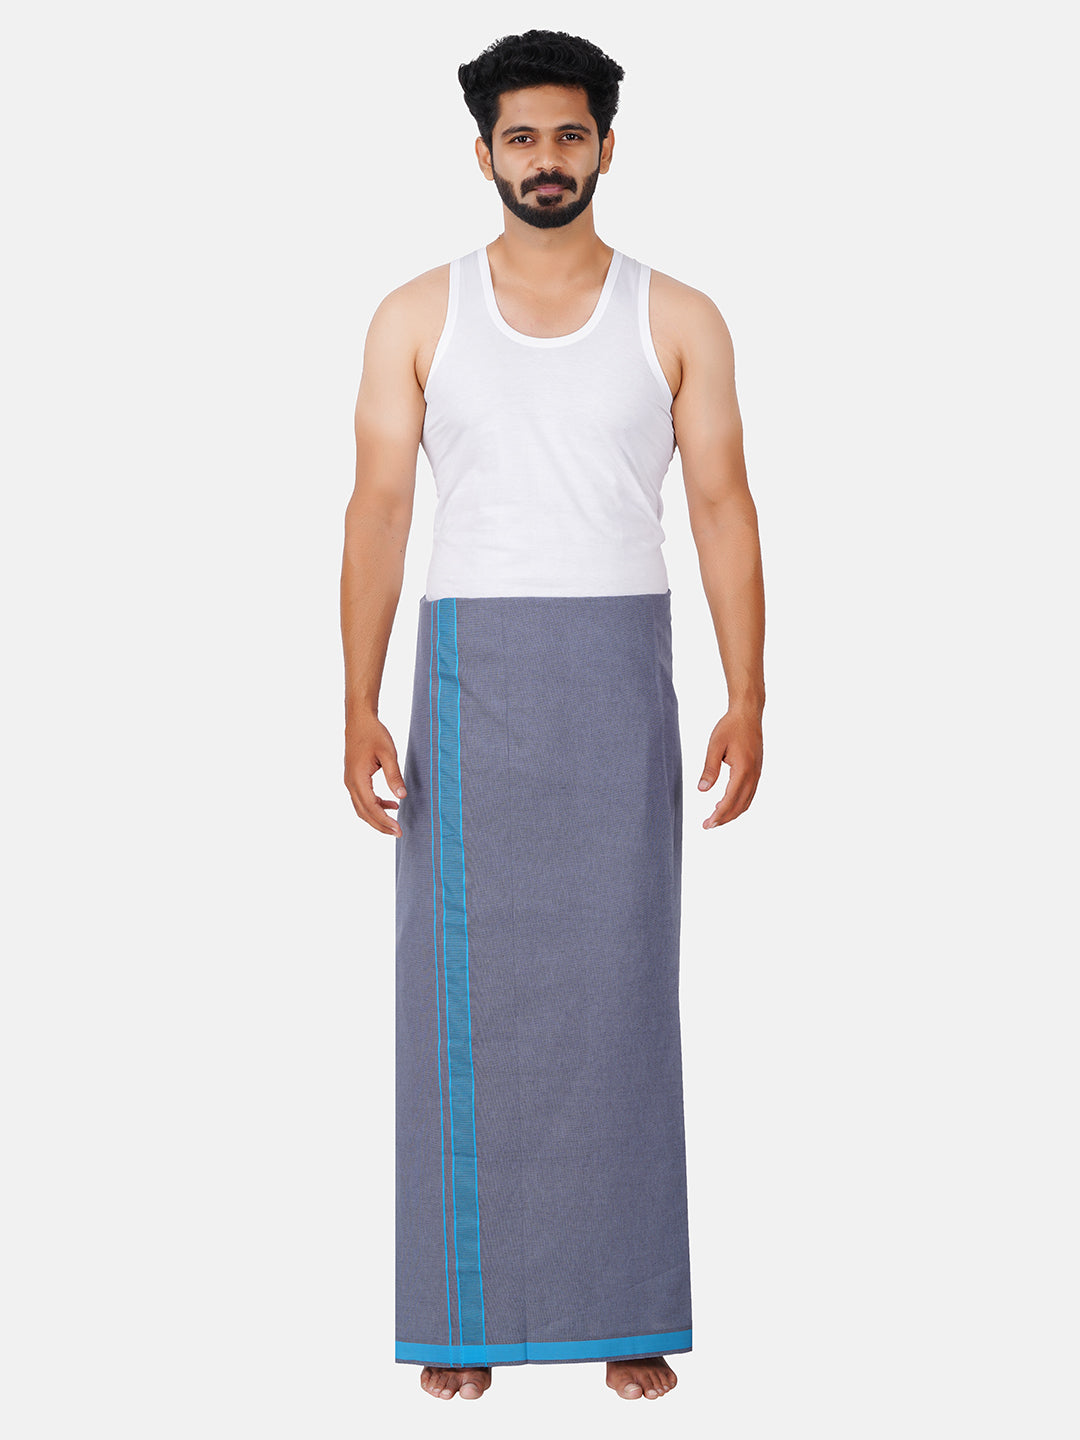 Mens Grey with Fancy Border Dhoti Mystyle Colour 3-Full view one